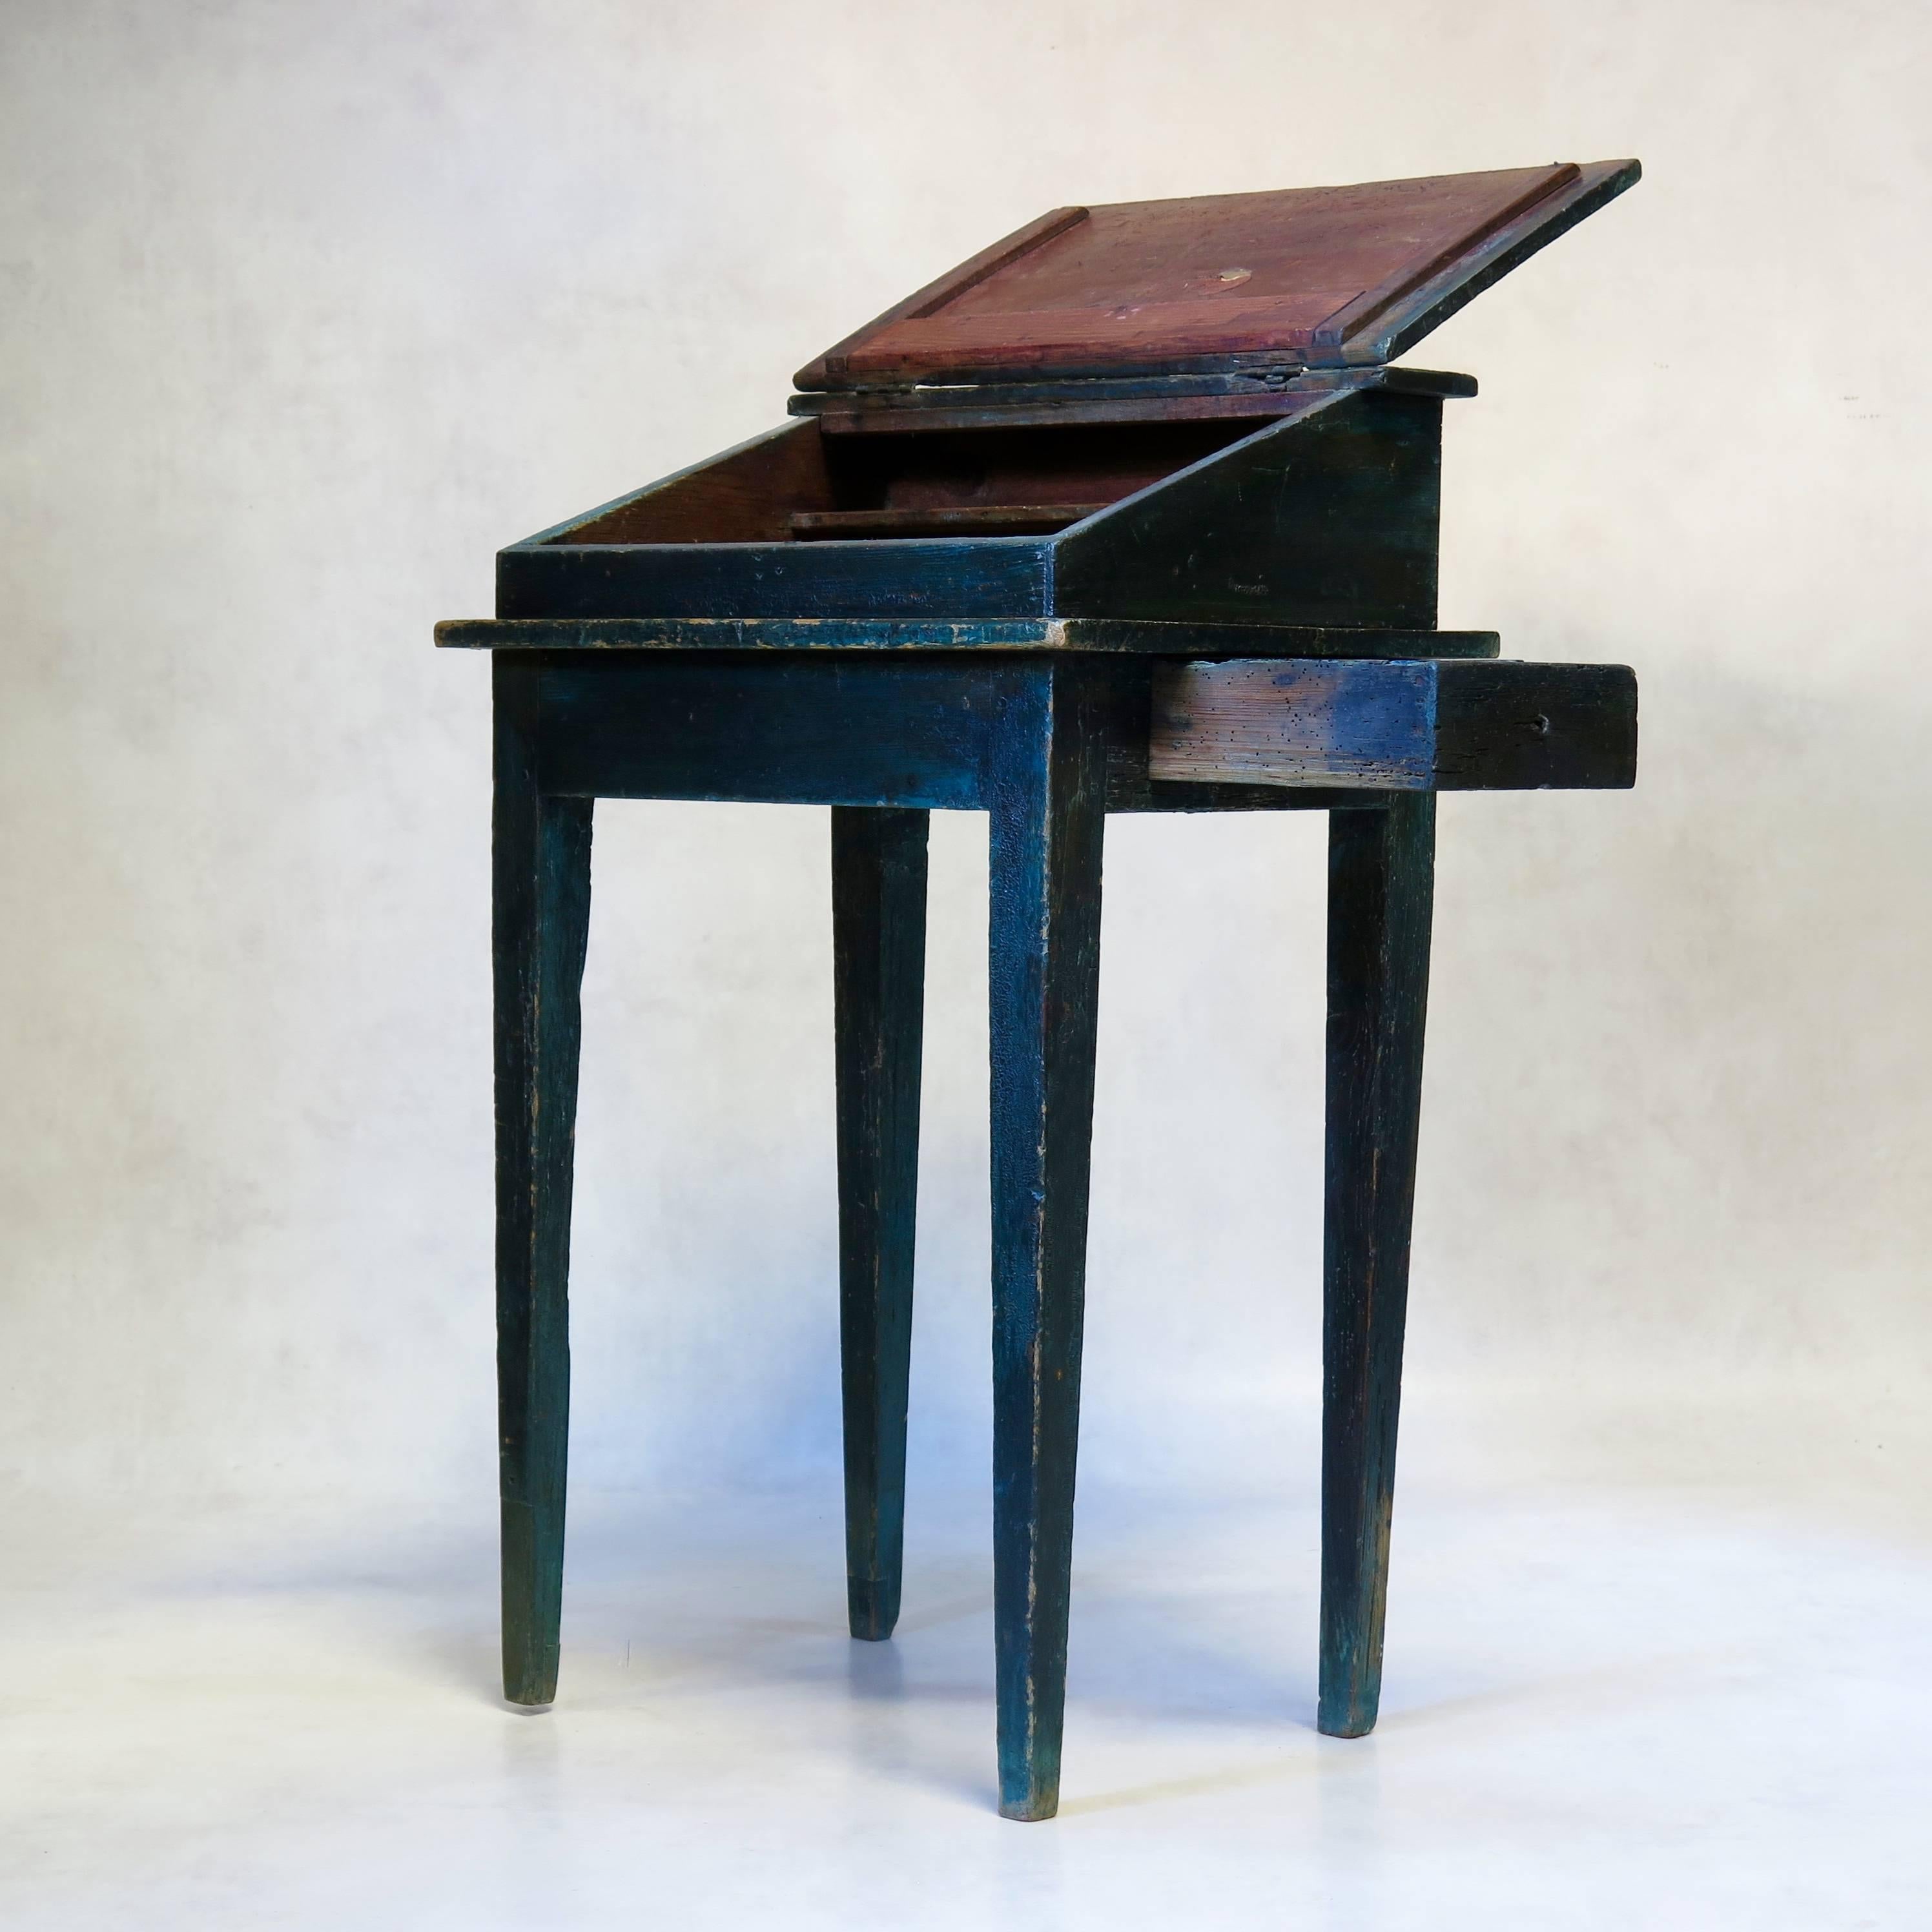 Charming and petite slant top writing desk with a secret little drawer hidden in the side. Lovely deep sea green color with nice patina.